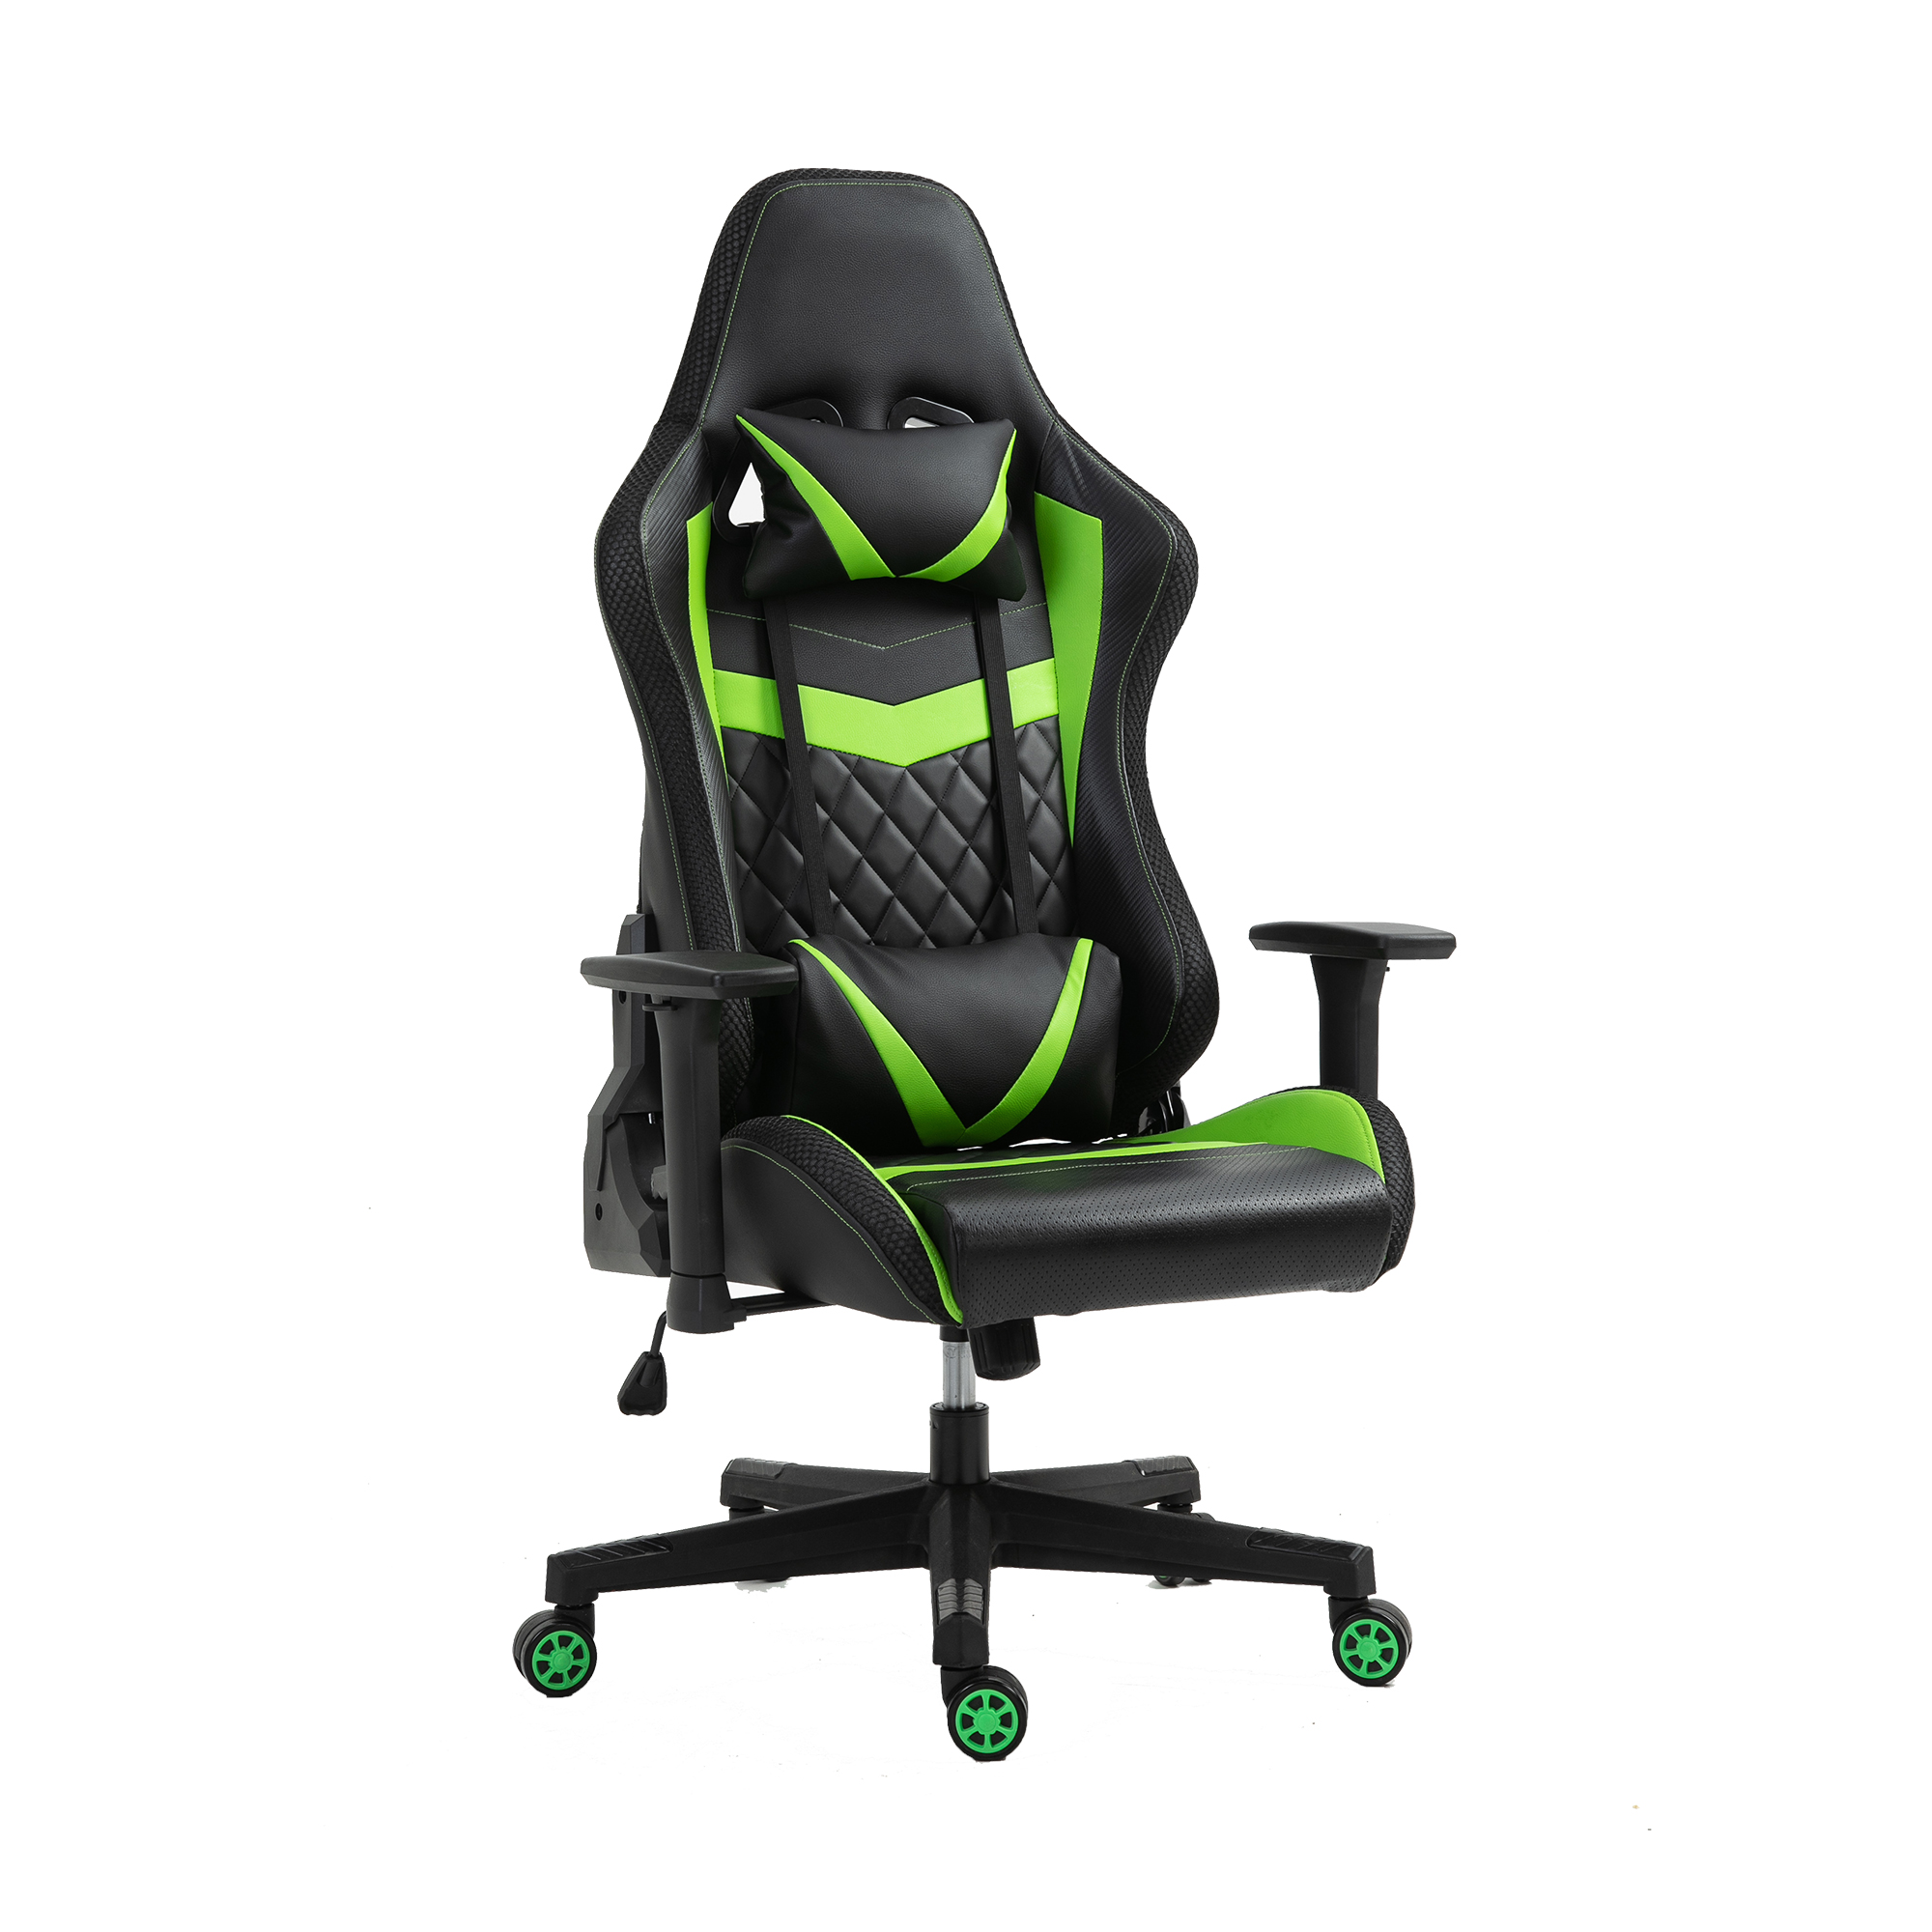 OEM High Quality Rgb Gaming Chair Suppliers –  Free Sample Hot Selling Cheap Leather Racing Chair For Gamer Home Office Chairs PC Gaming Setups – ANJI JIFANG